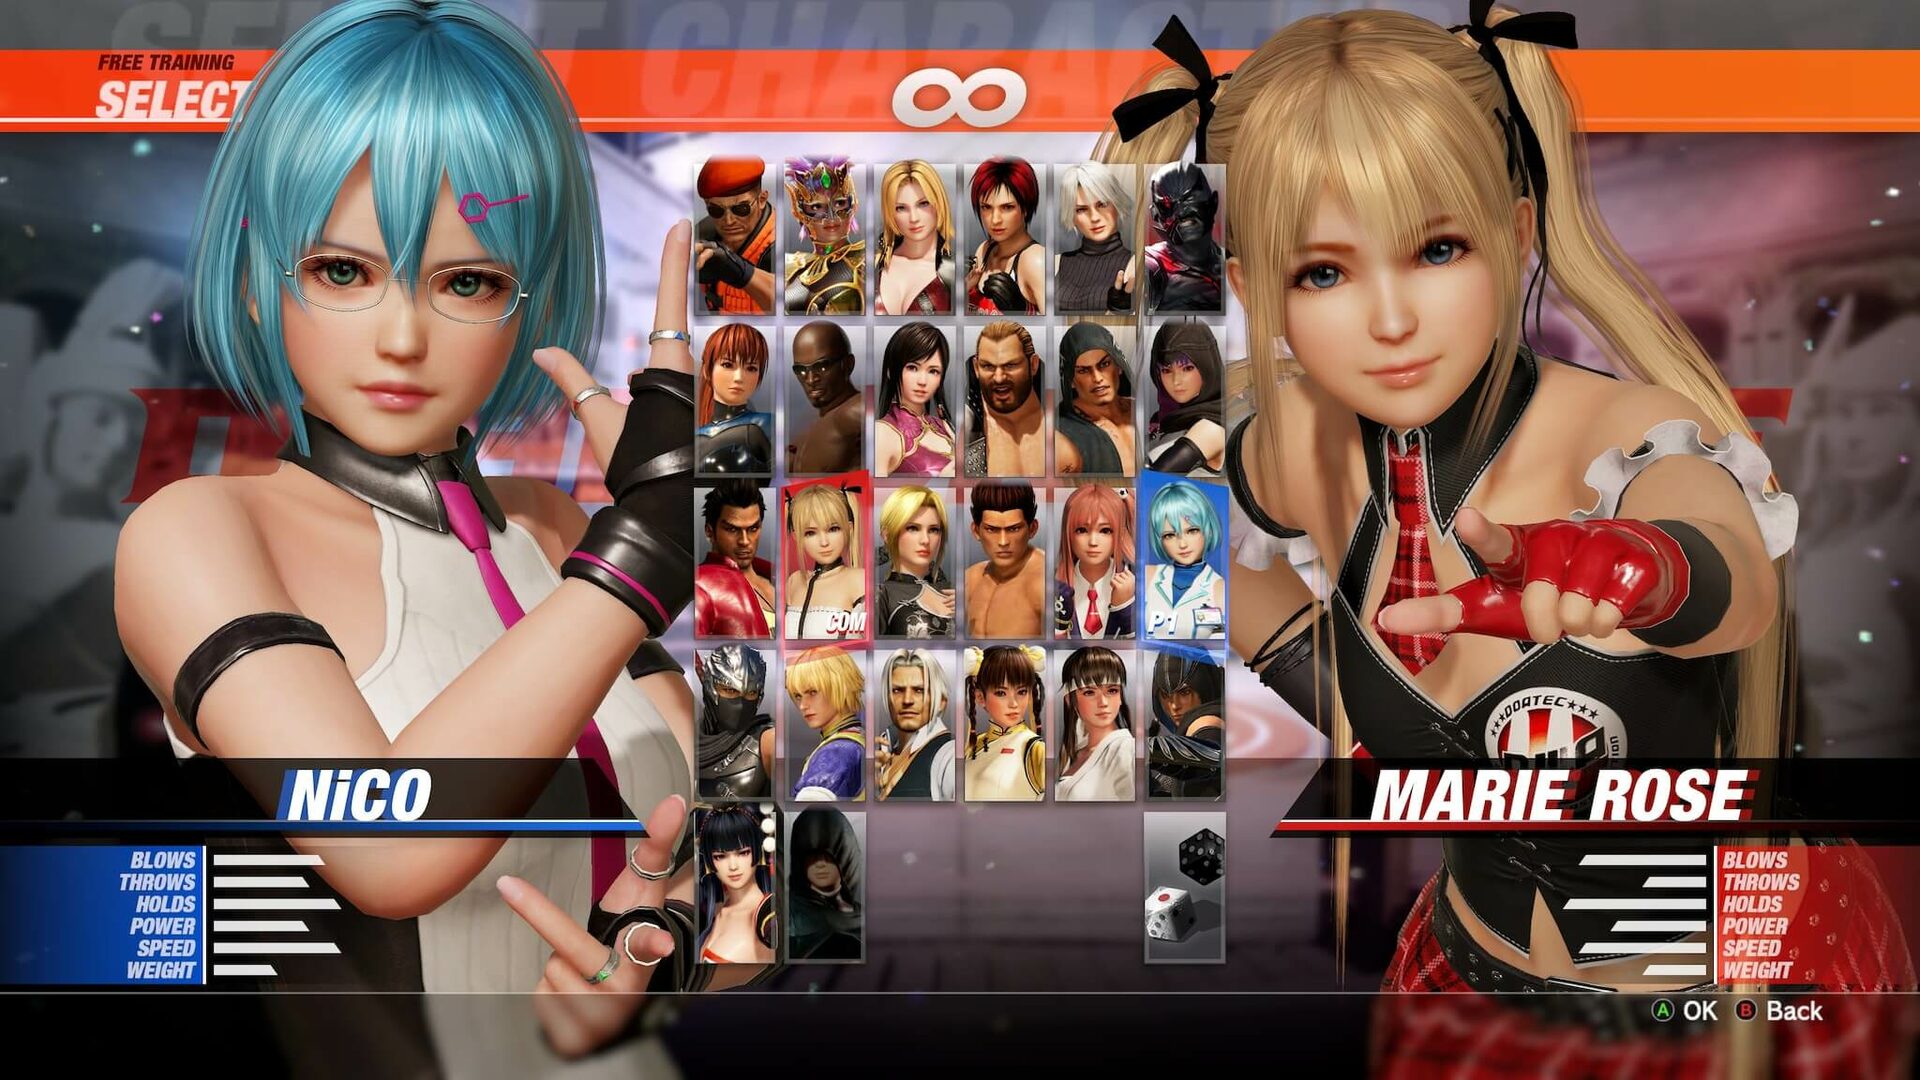 DEAD OR ALIVE 6 on Steam